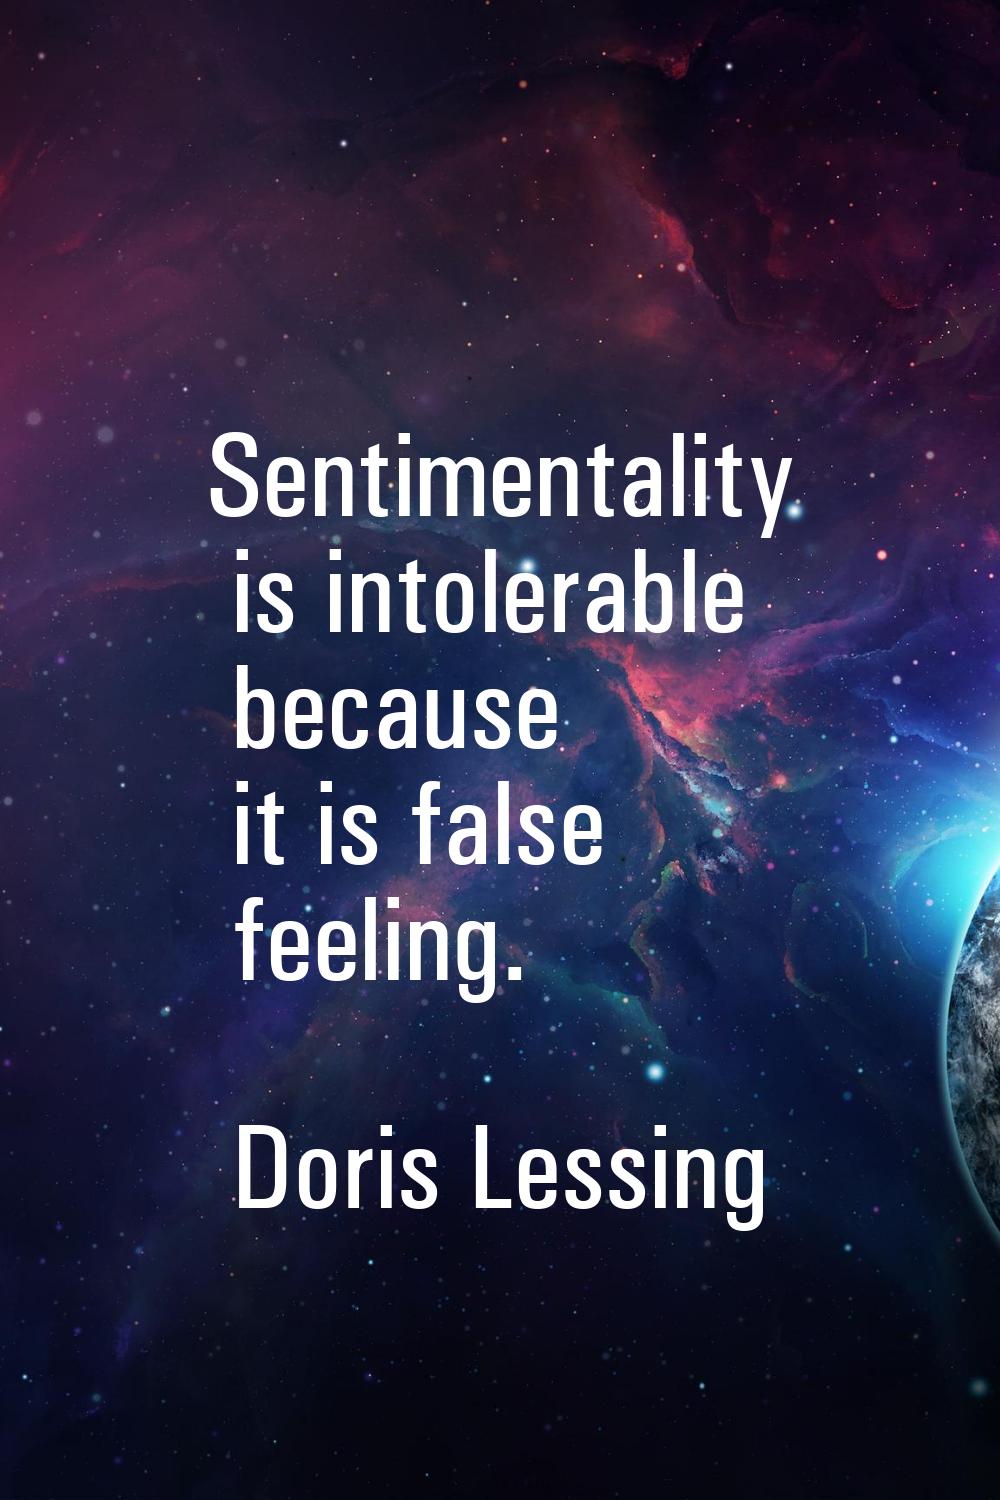 Sentimentality is intolerable because it is false feeling.